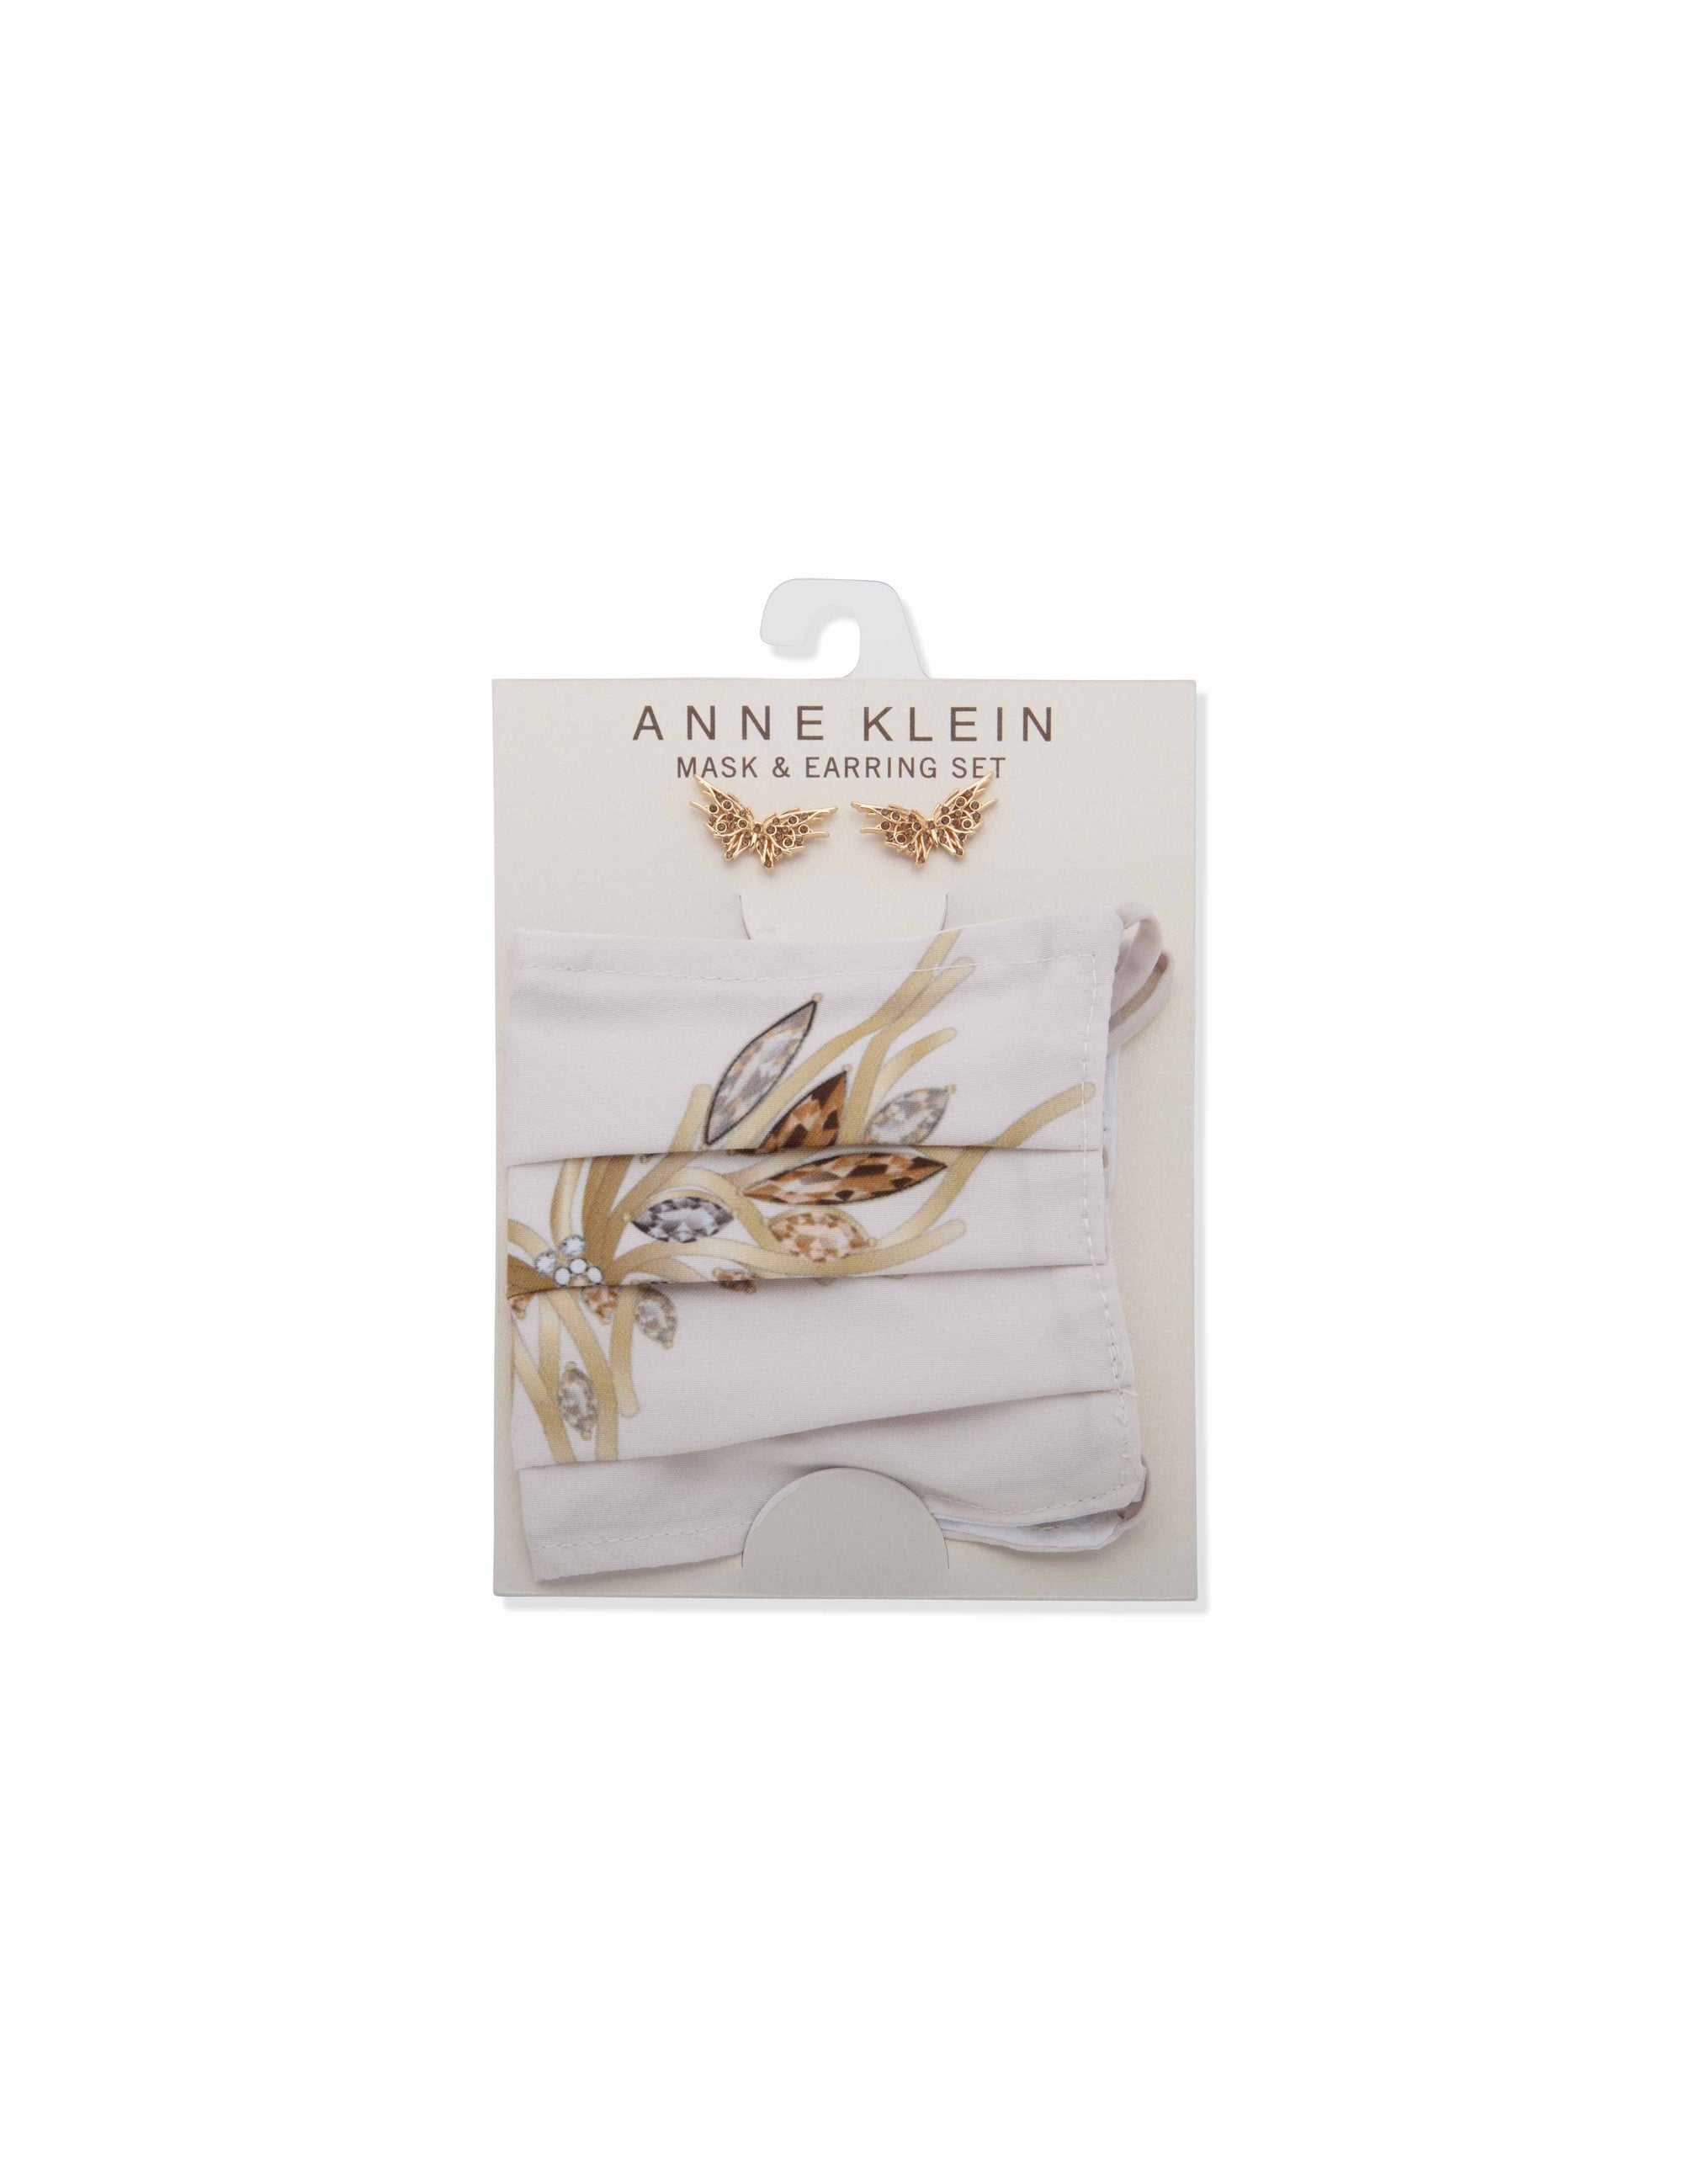 Anne Klein Gold-Tone Butterfly Earrings and Mask Set